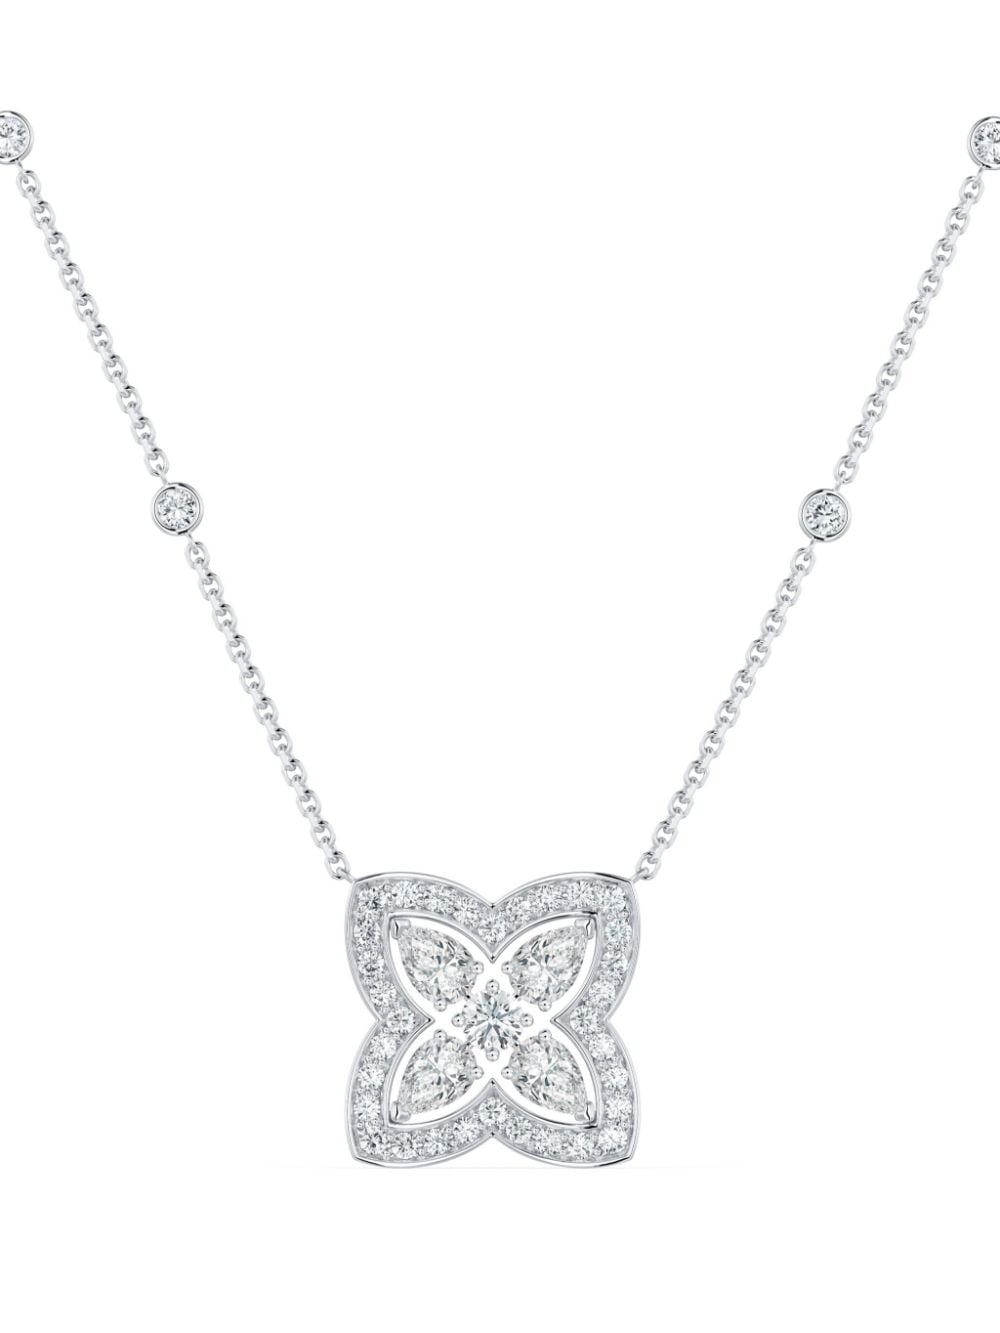 Image 2 of De Beers Jewellers 18kt white gold Enchanted Lotus diamond pendant necklace